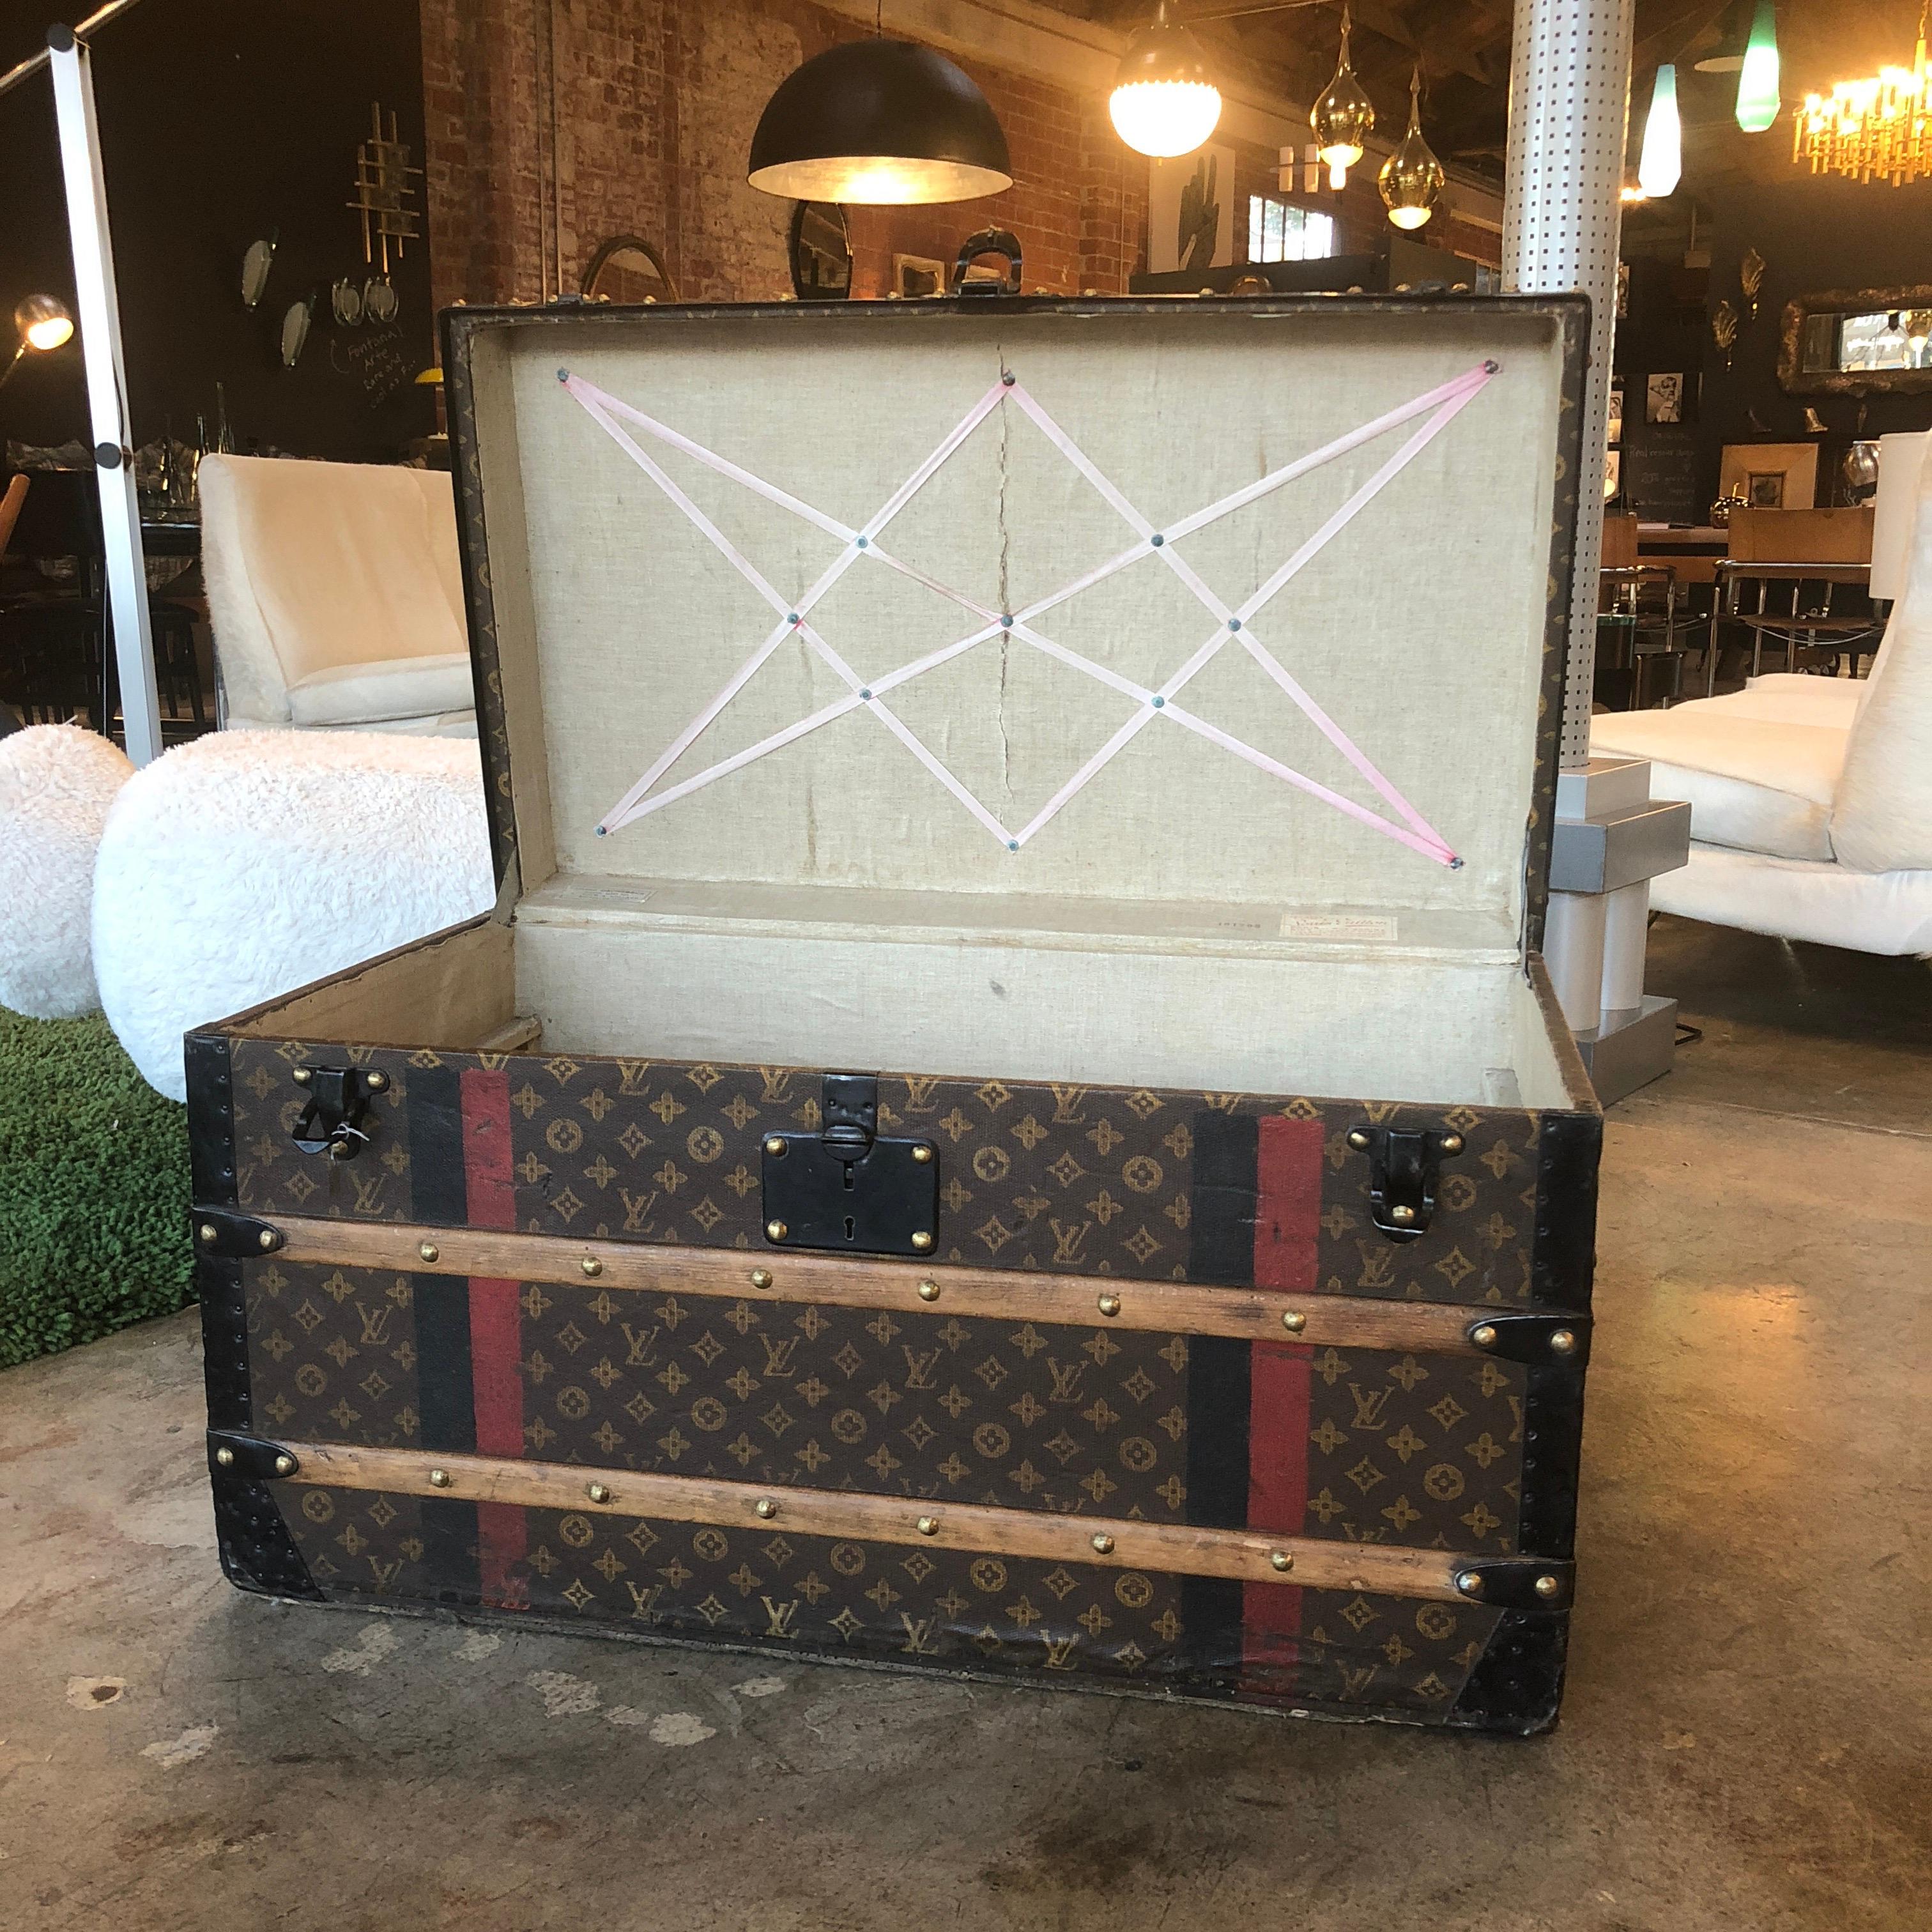 French Louis Vuitton Trunk with DMK Initials, circa 1920s